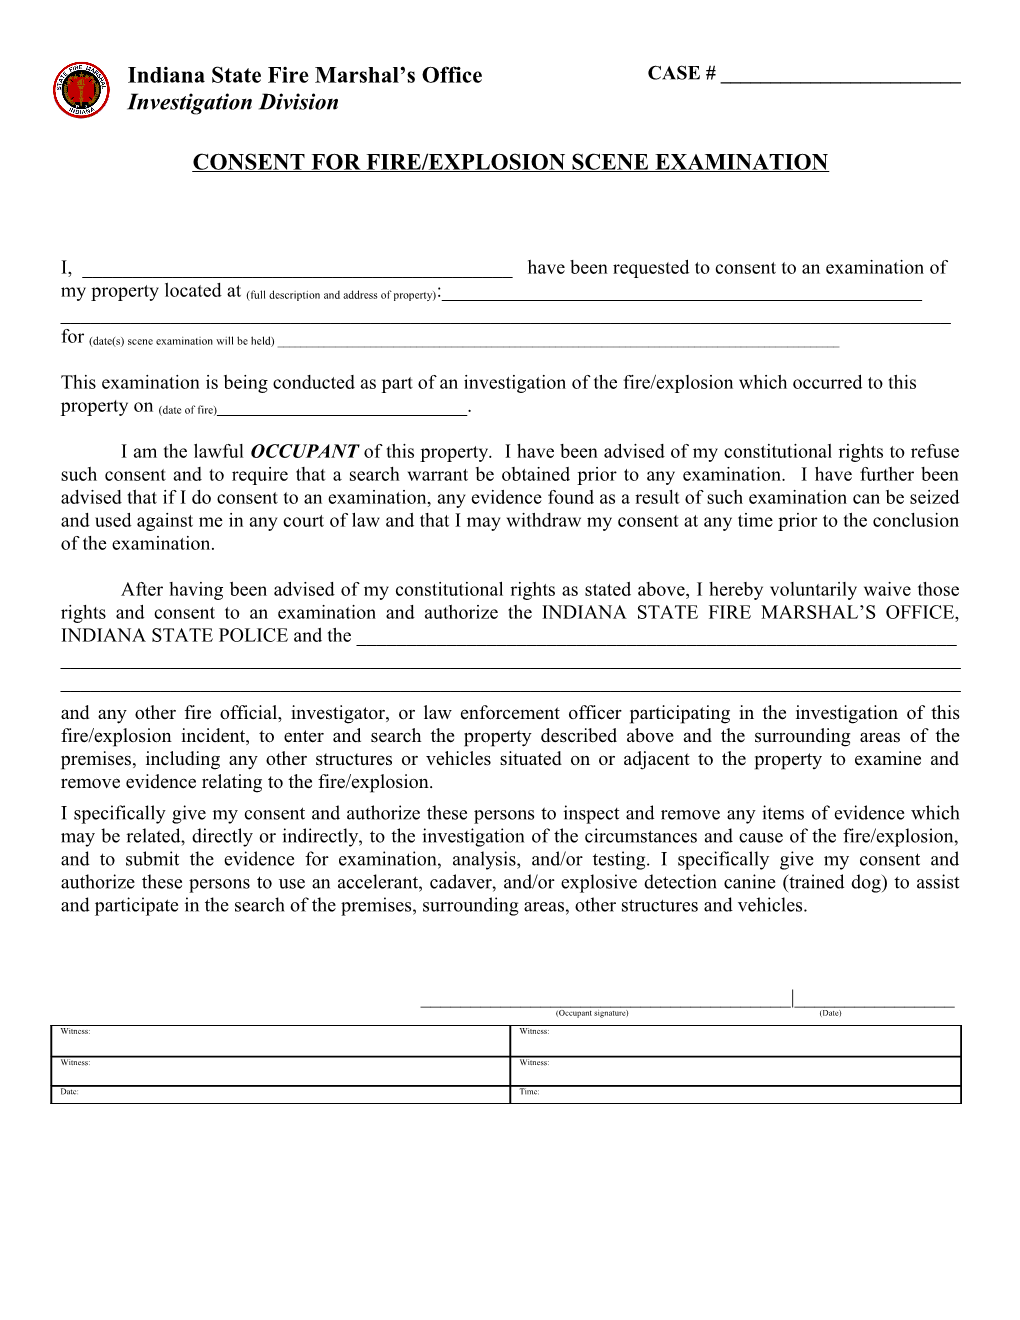 Consent for Fire/Explosion Scene Examination